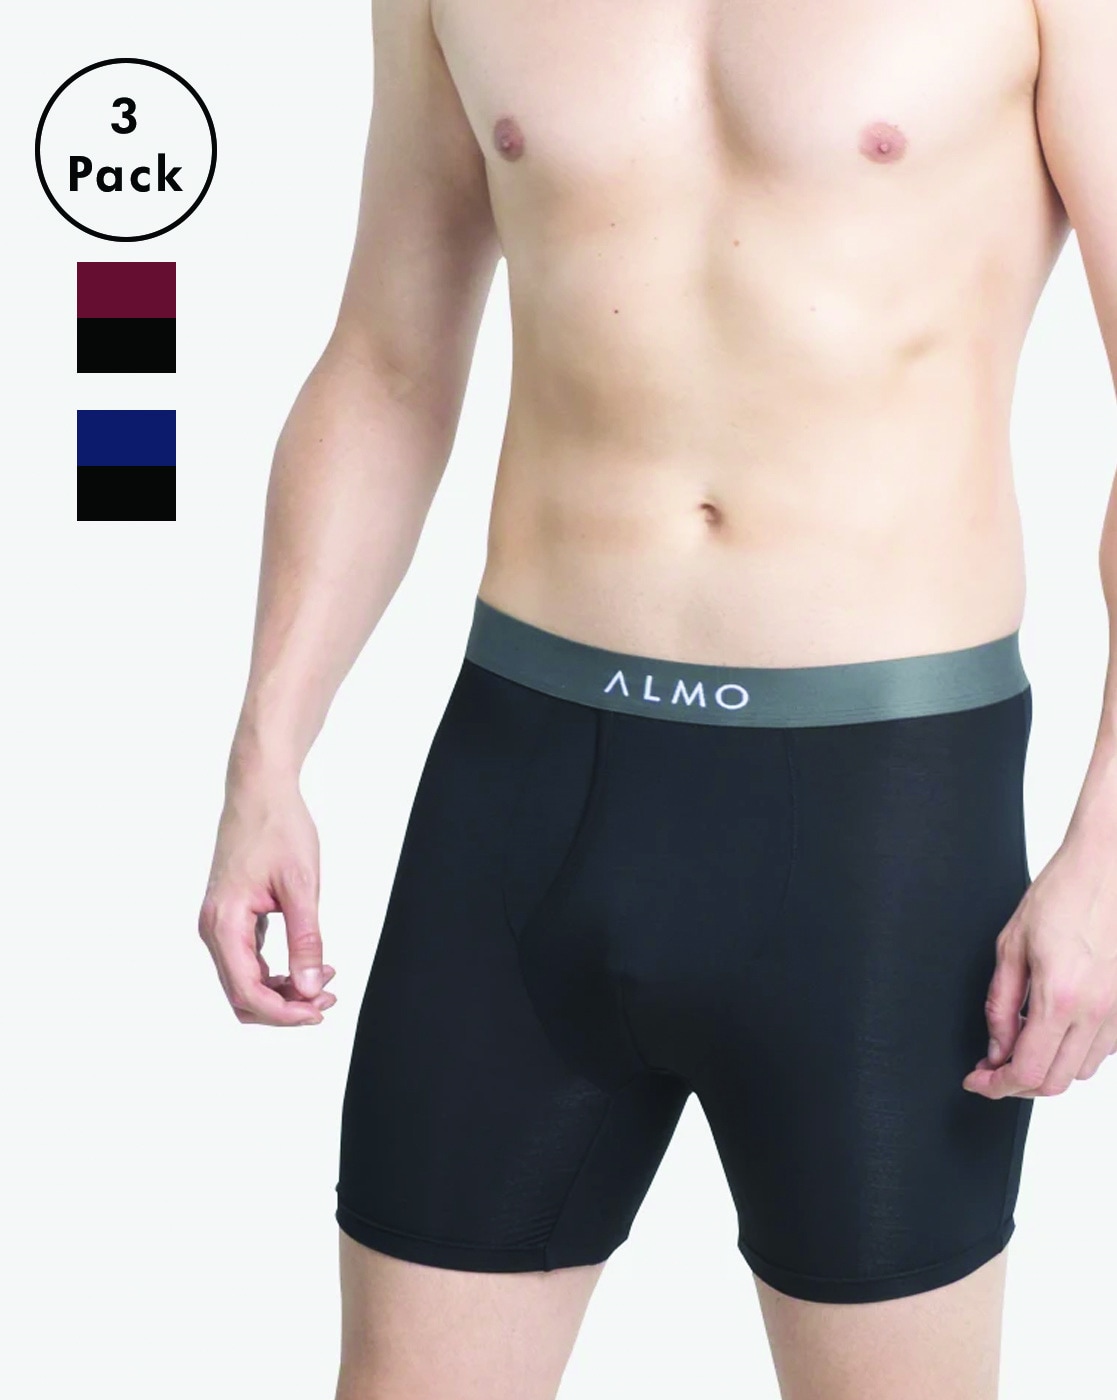 Pack of 3 Boxer Briefs